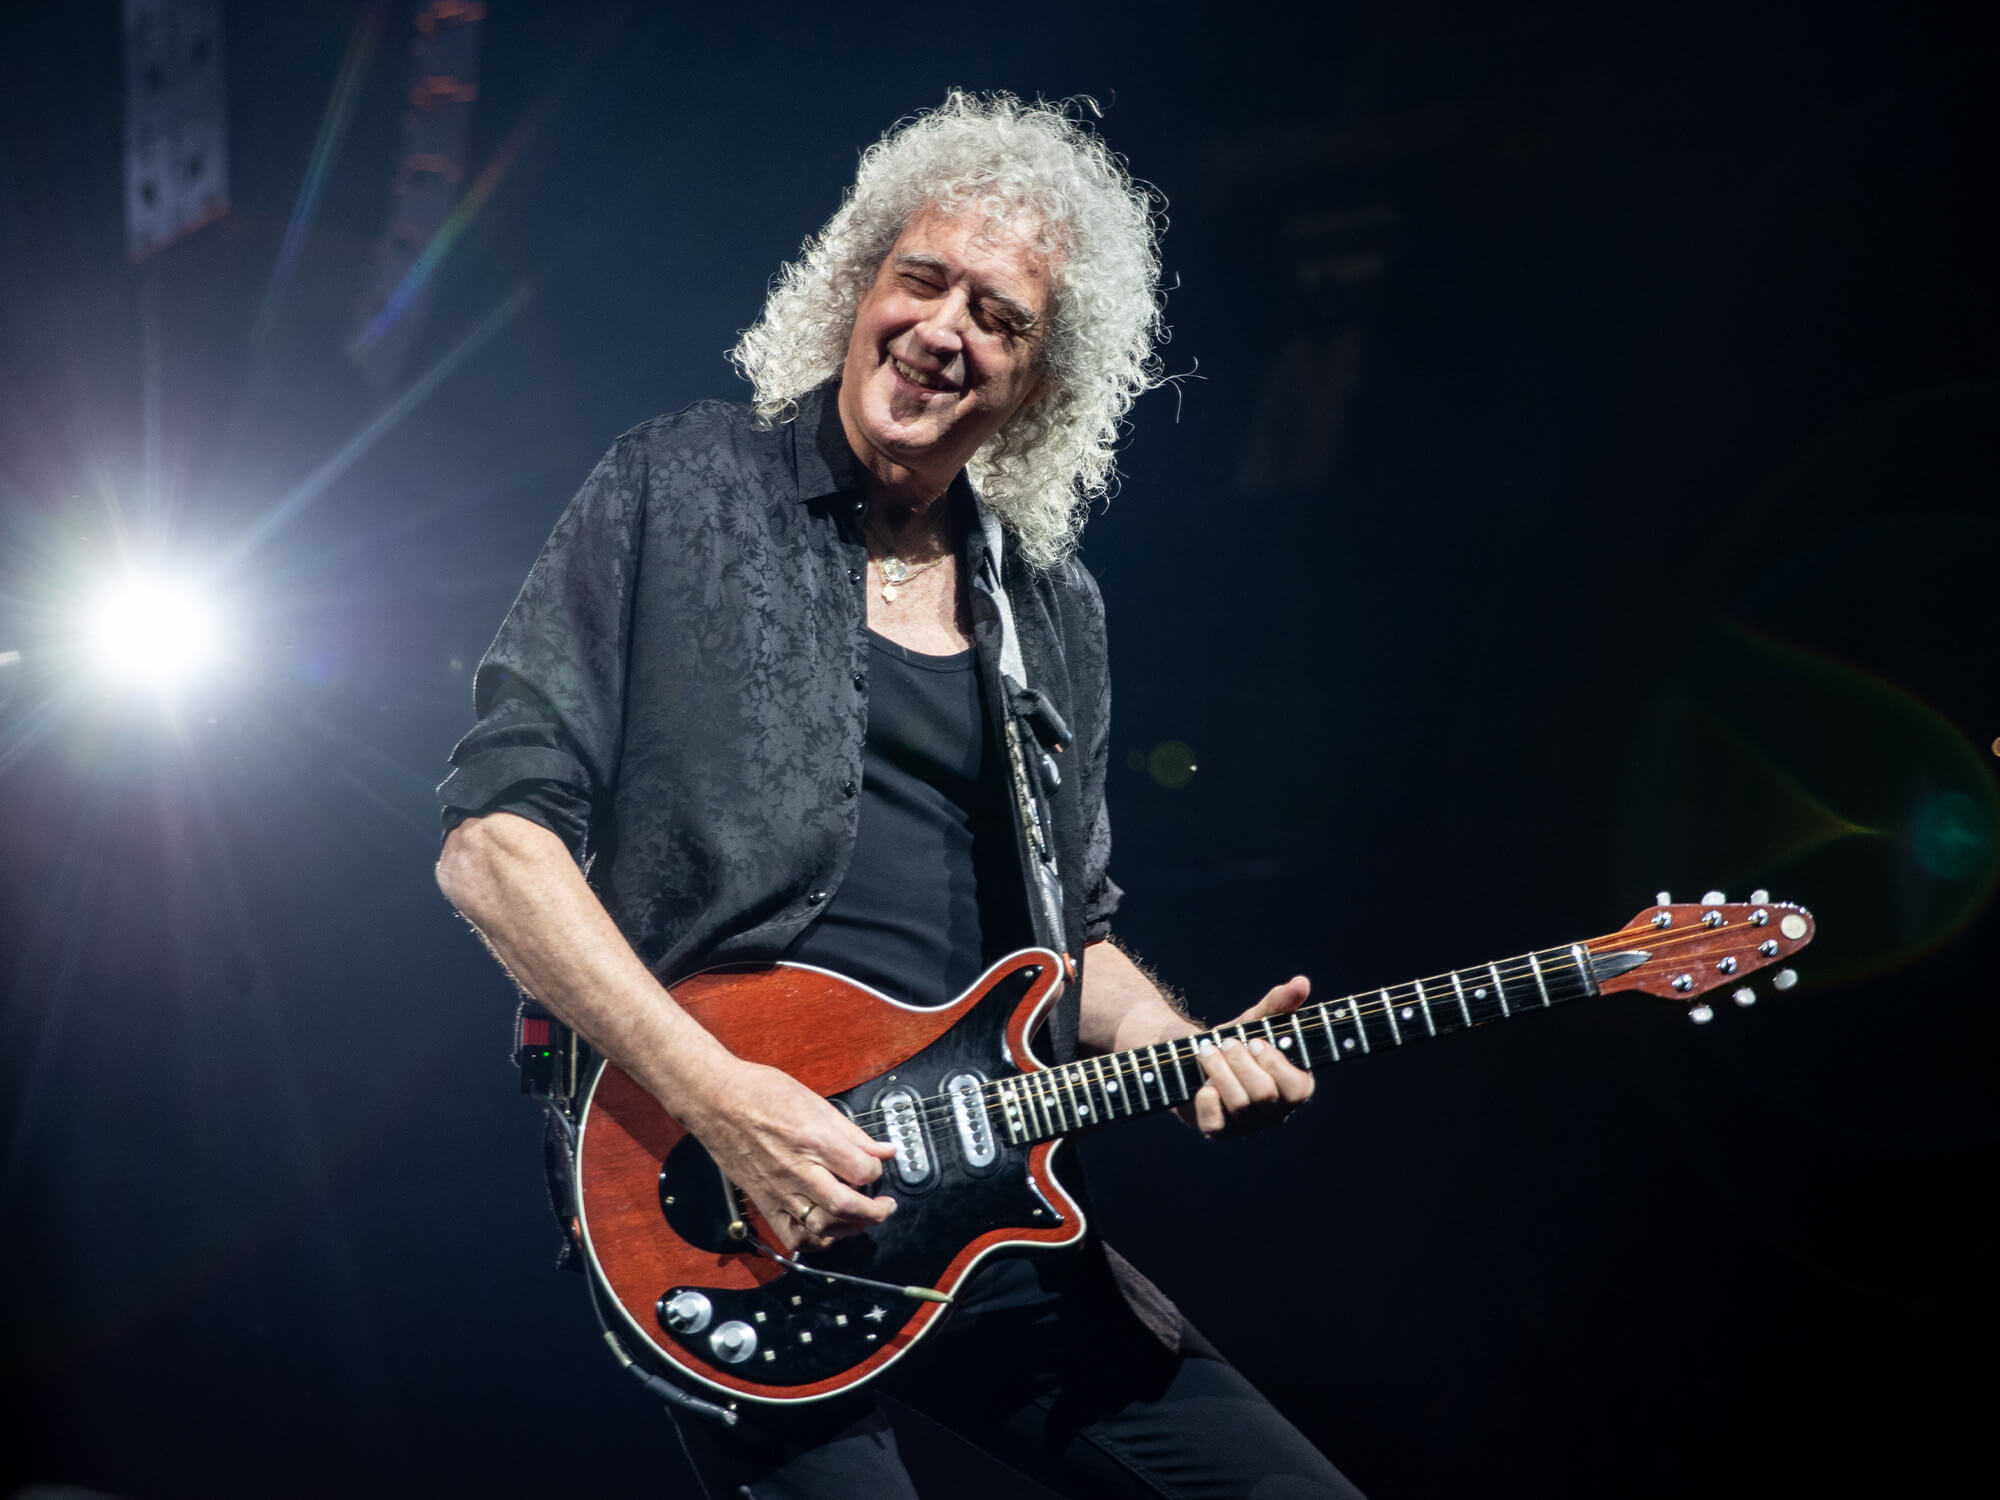 Brian May on stage. He is playing his Red Special guitar and is smiling. He has long curly grey hair and is dressed in black.